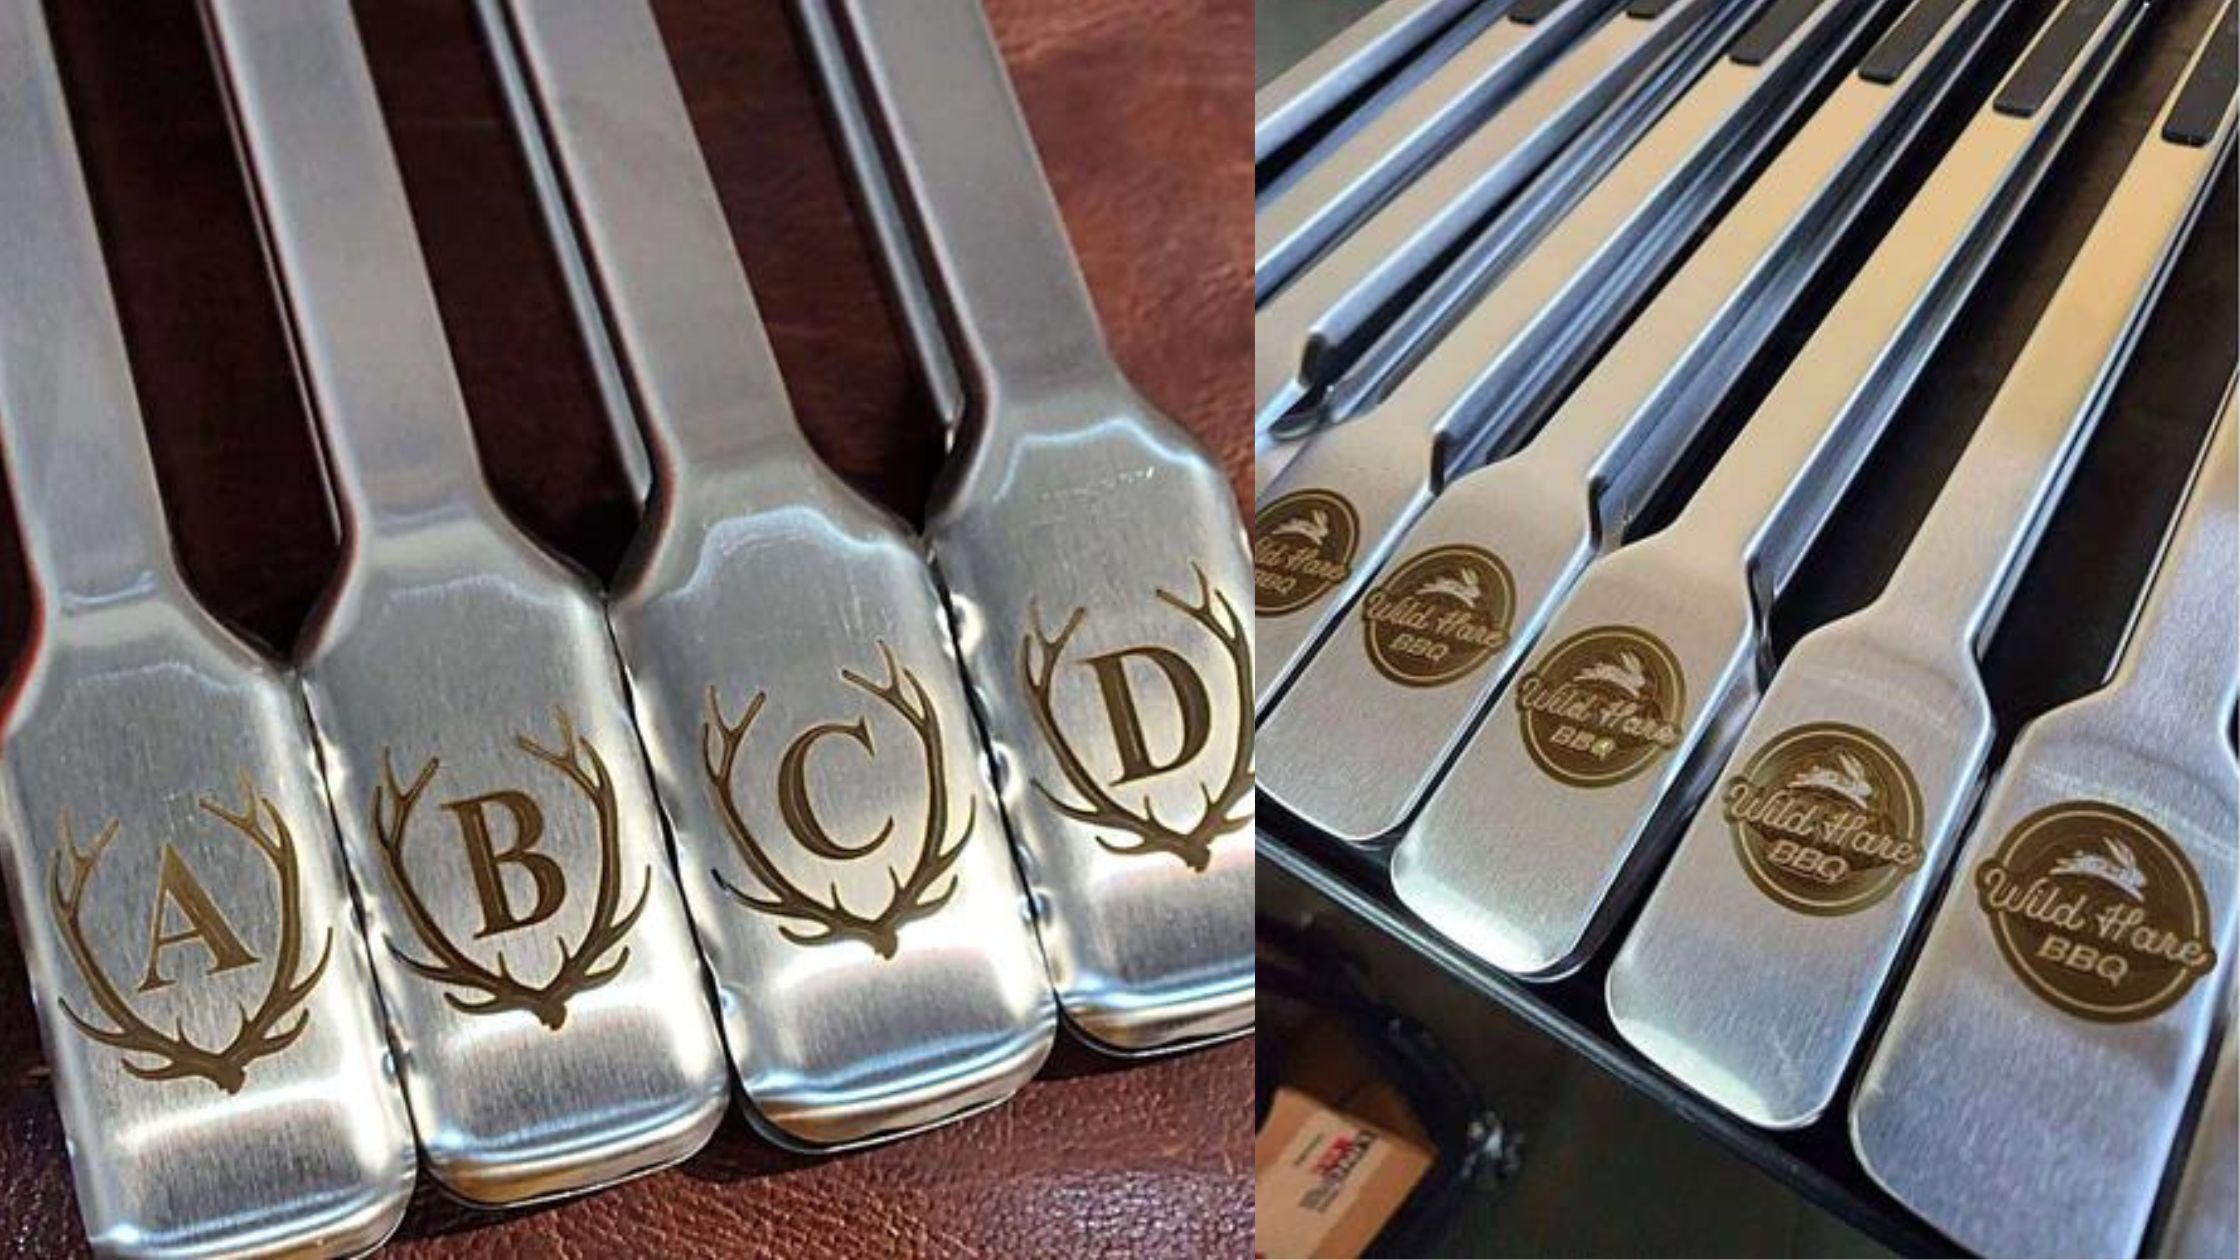 Custom BBQ Tongs for Grilling - Personalized Grilling Accessories